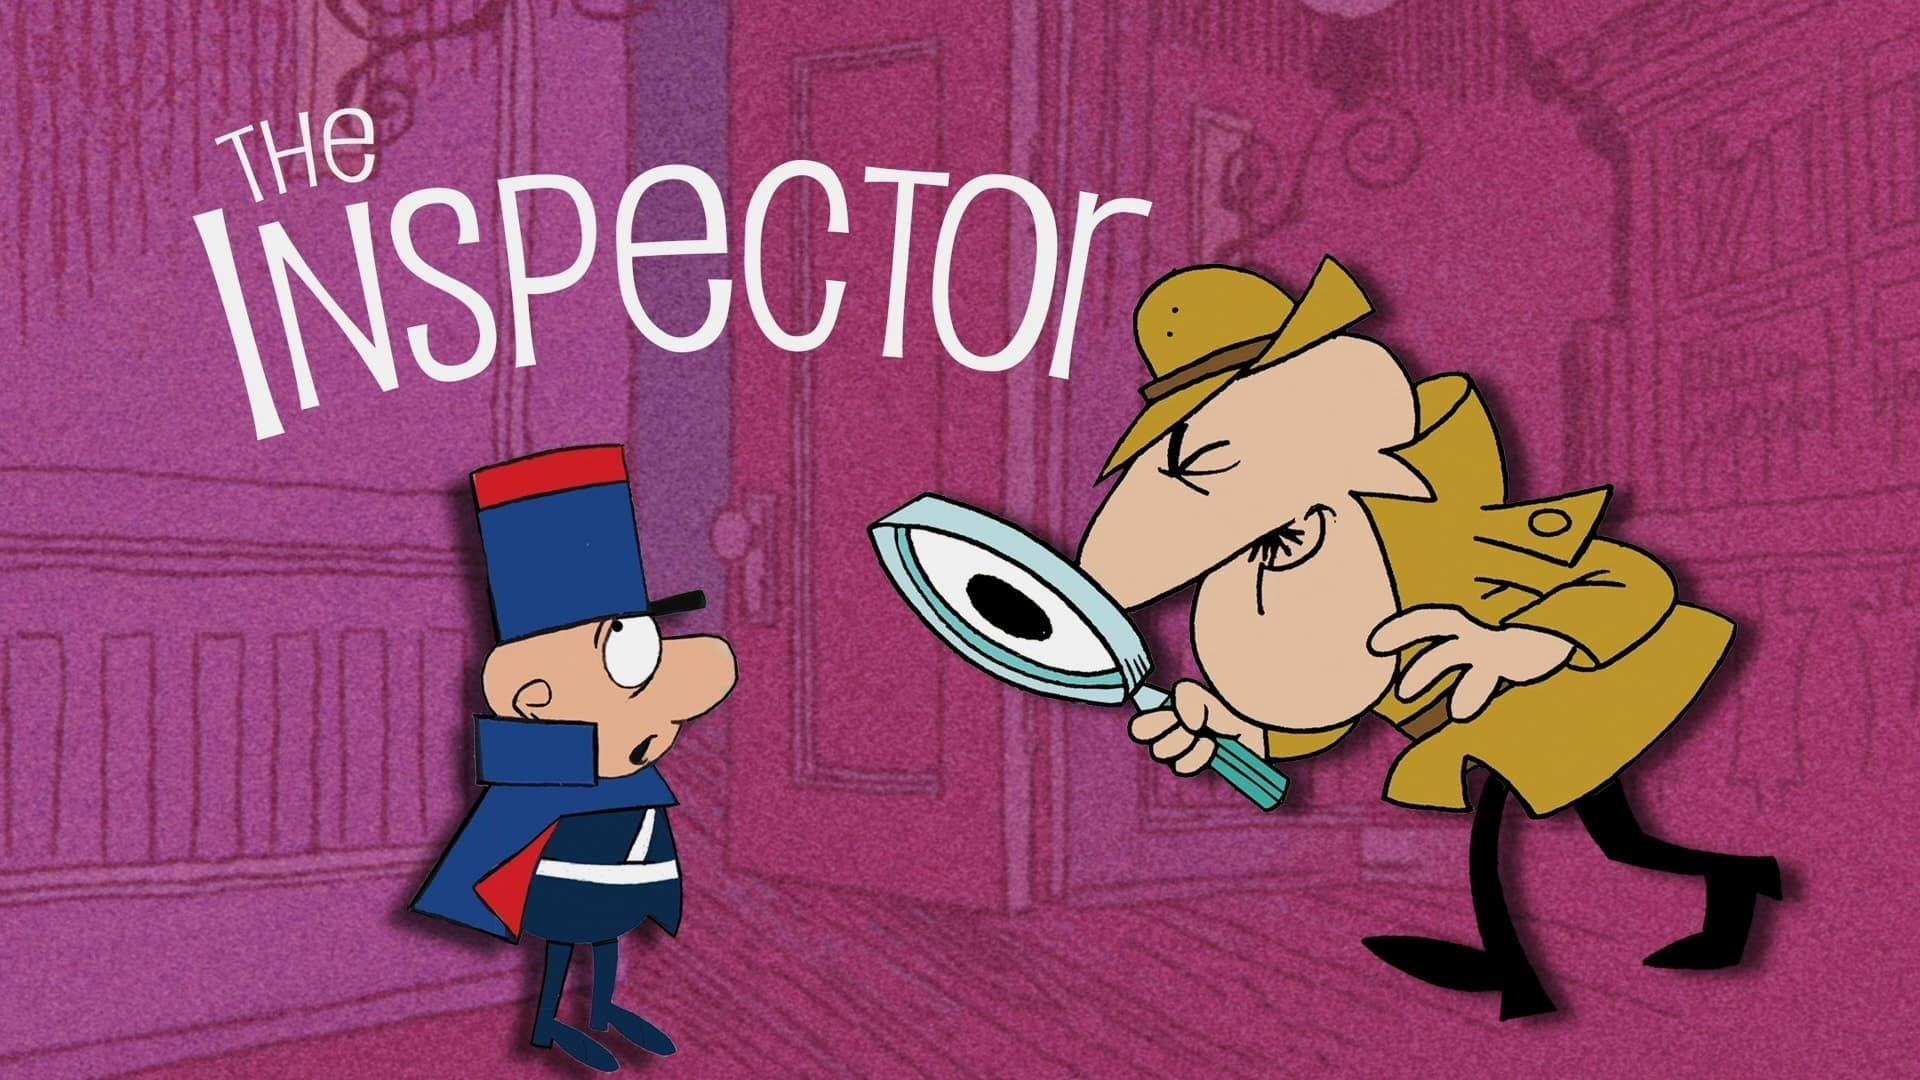 The Inspector background